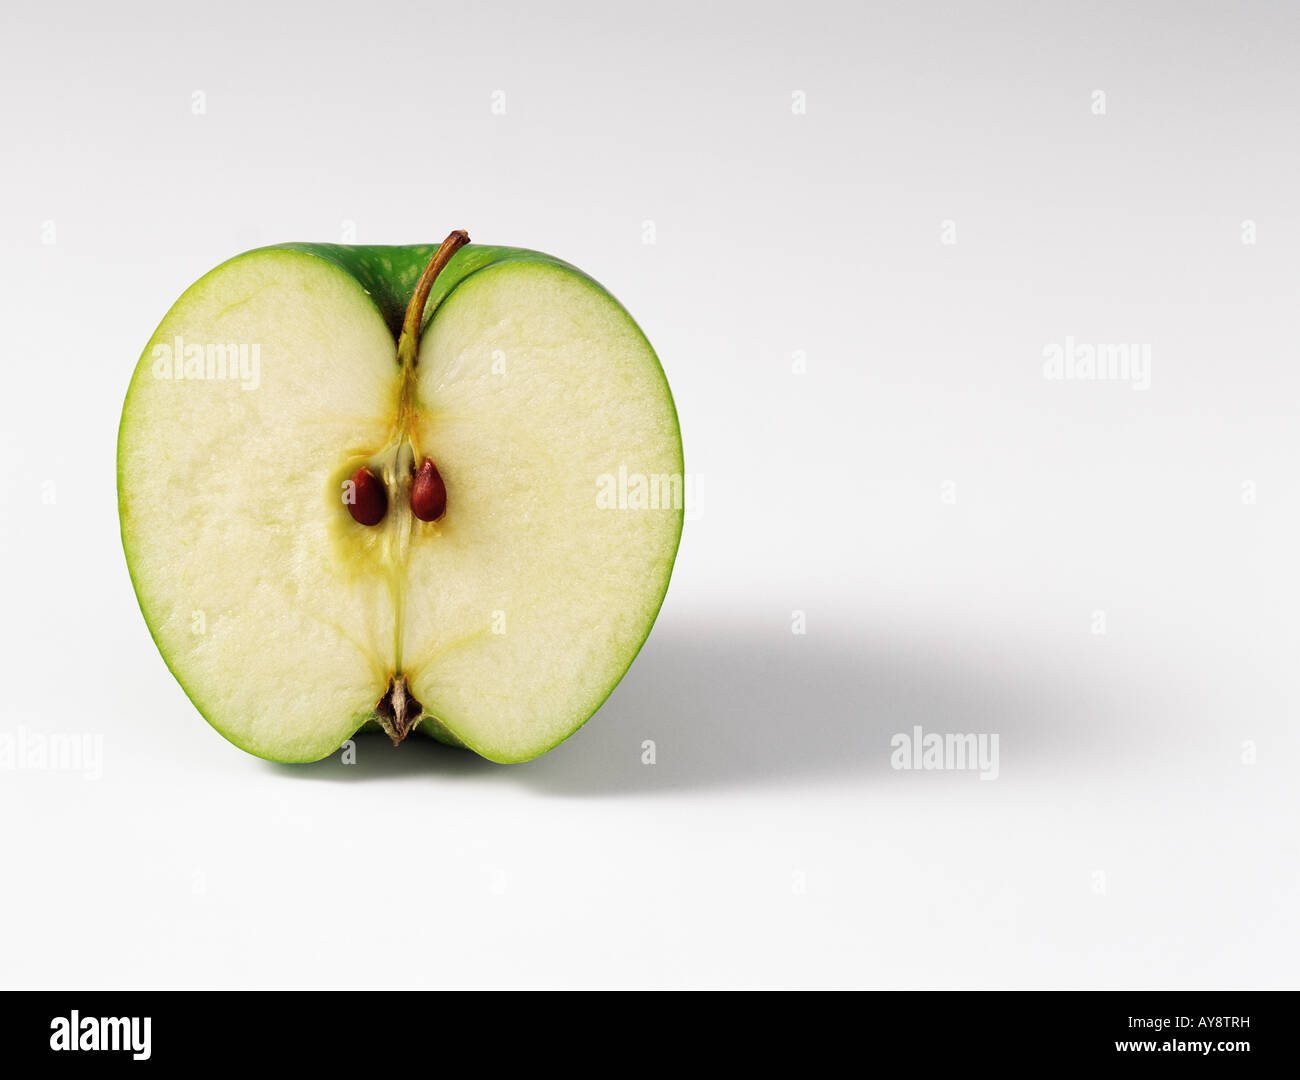 Green apple, cross section, close-up Stock Photo